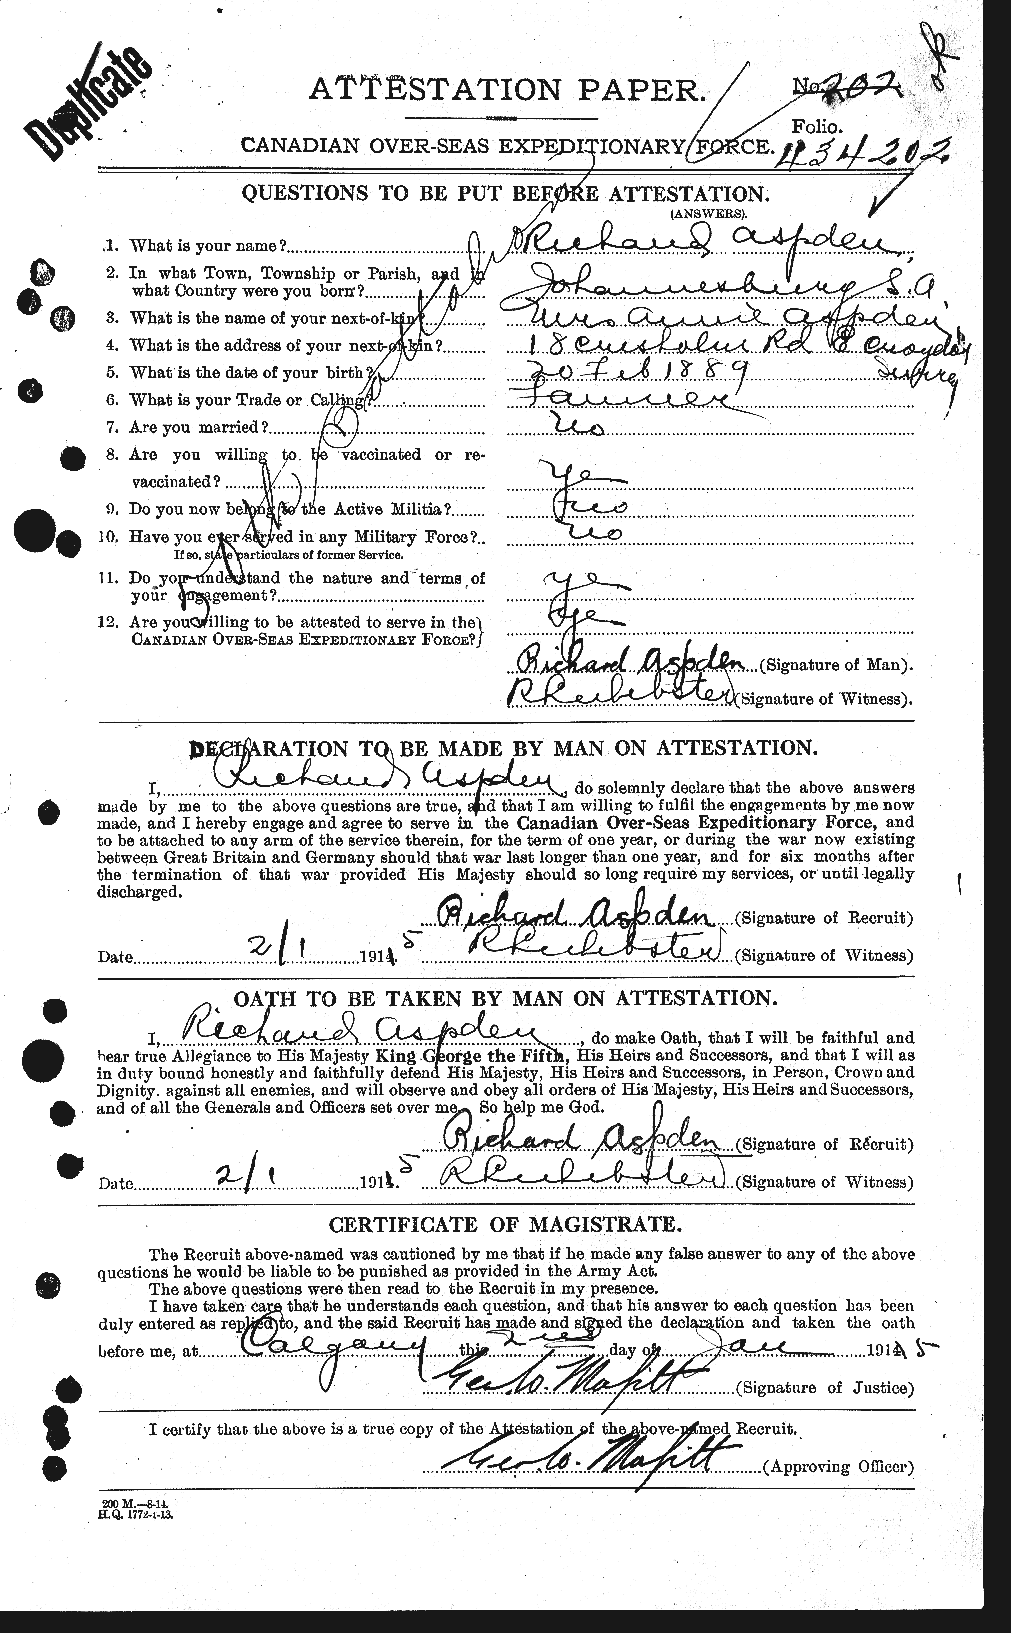 Personnel Records of the First World War - CEF 223610a